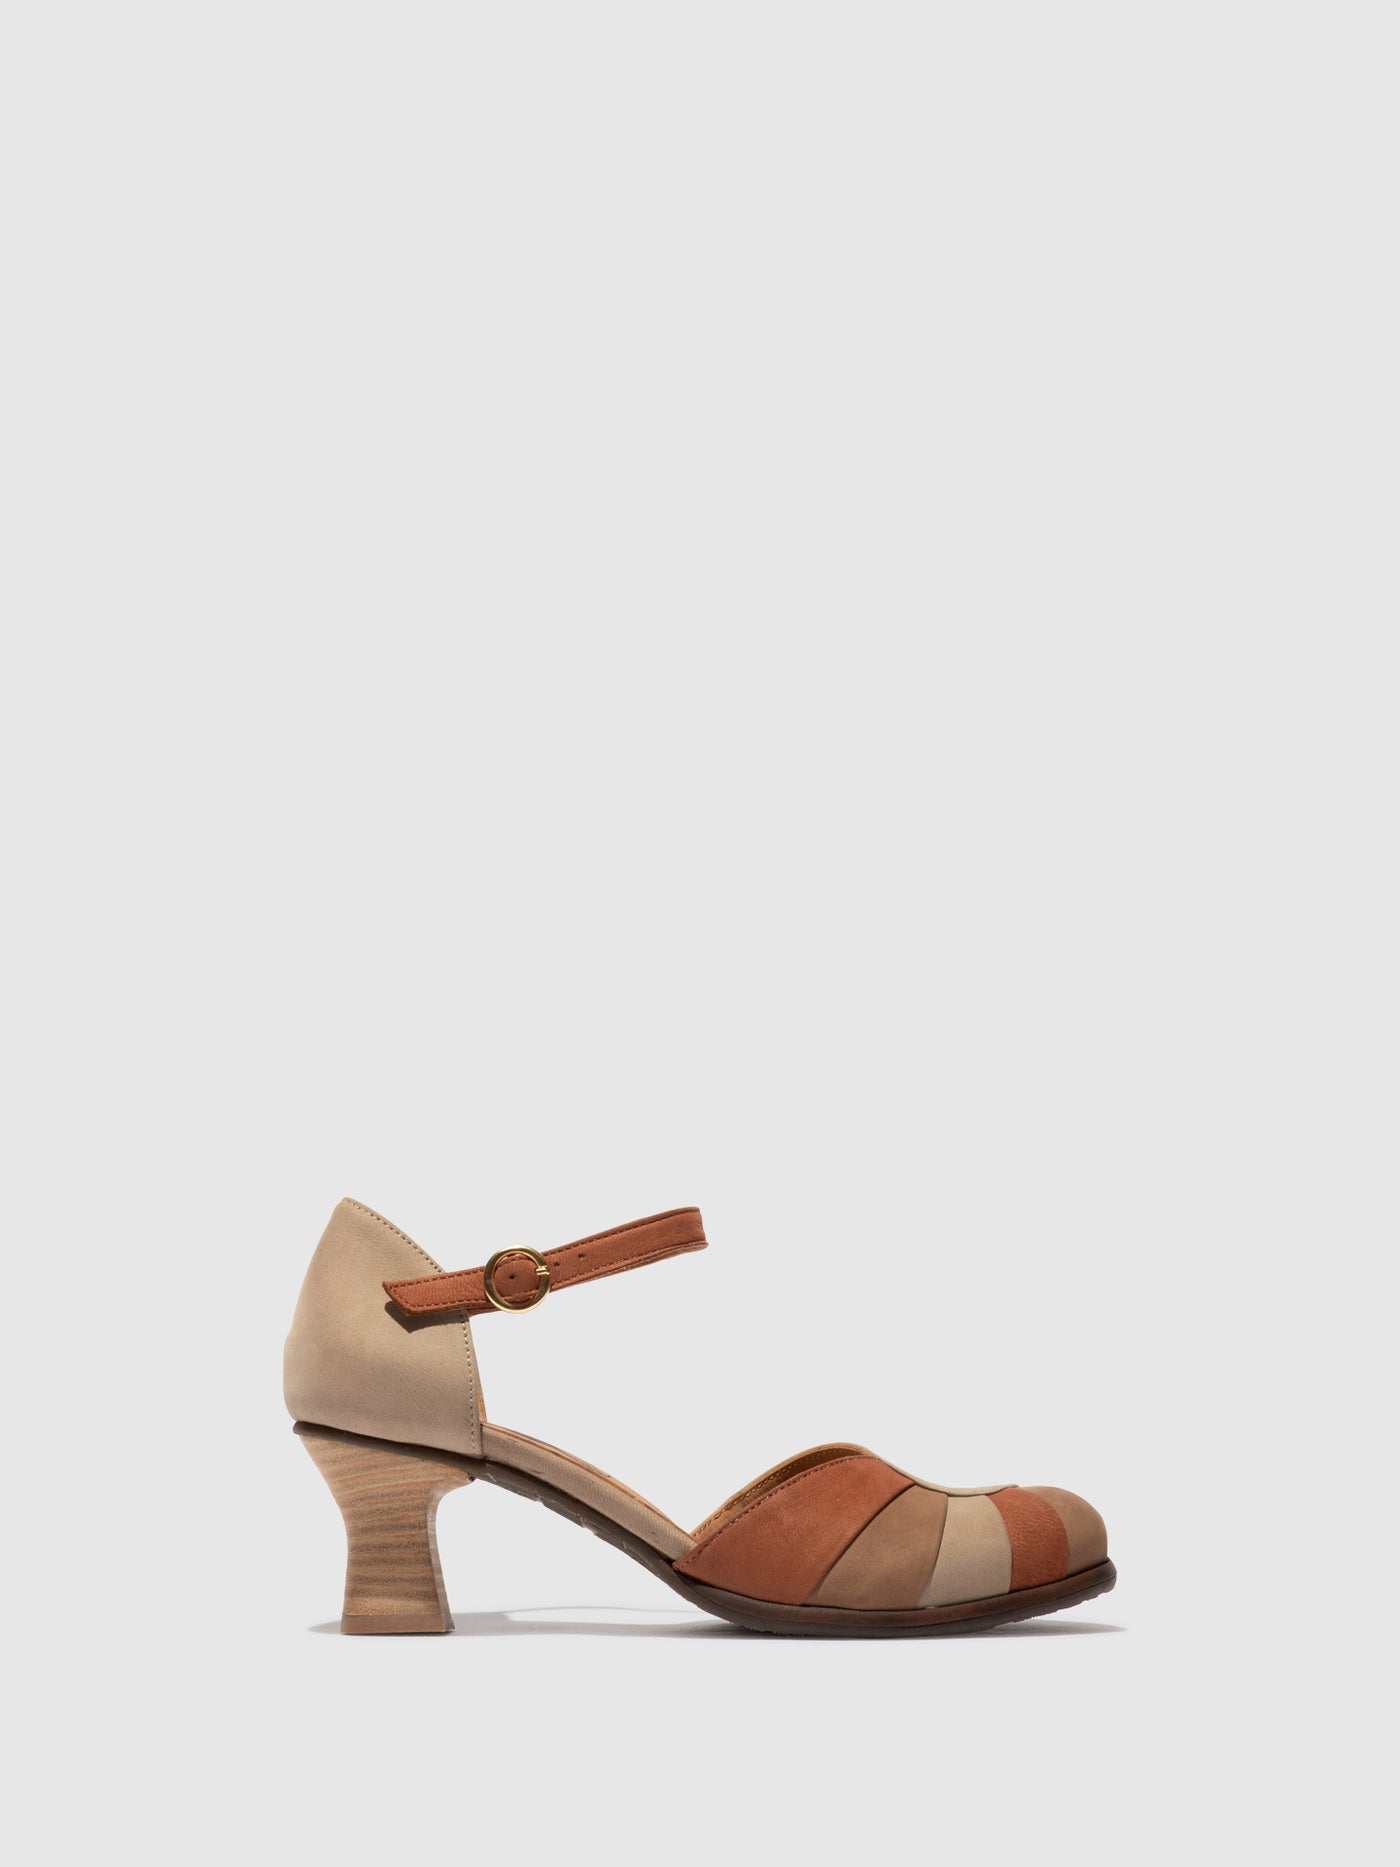 Heel Shoes BESH087FLY BEIGE/TAUPE/TAN